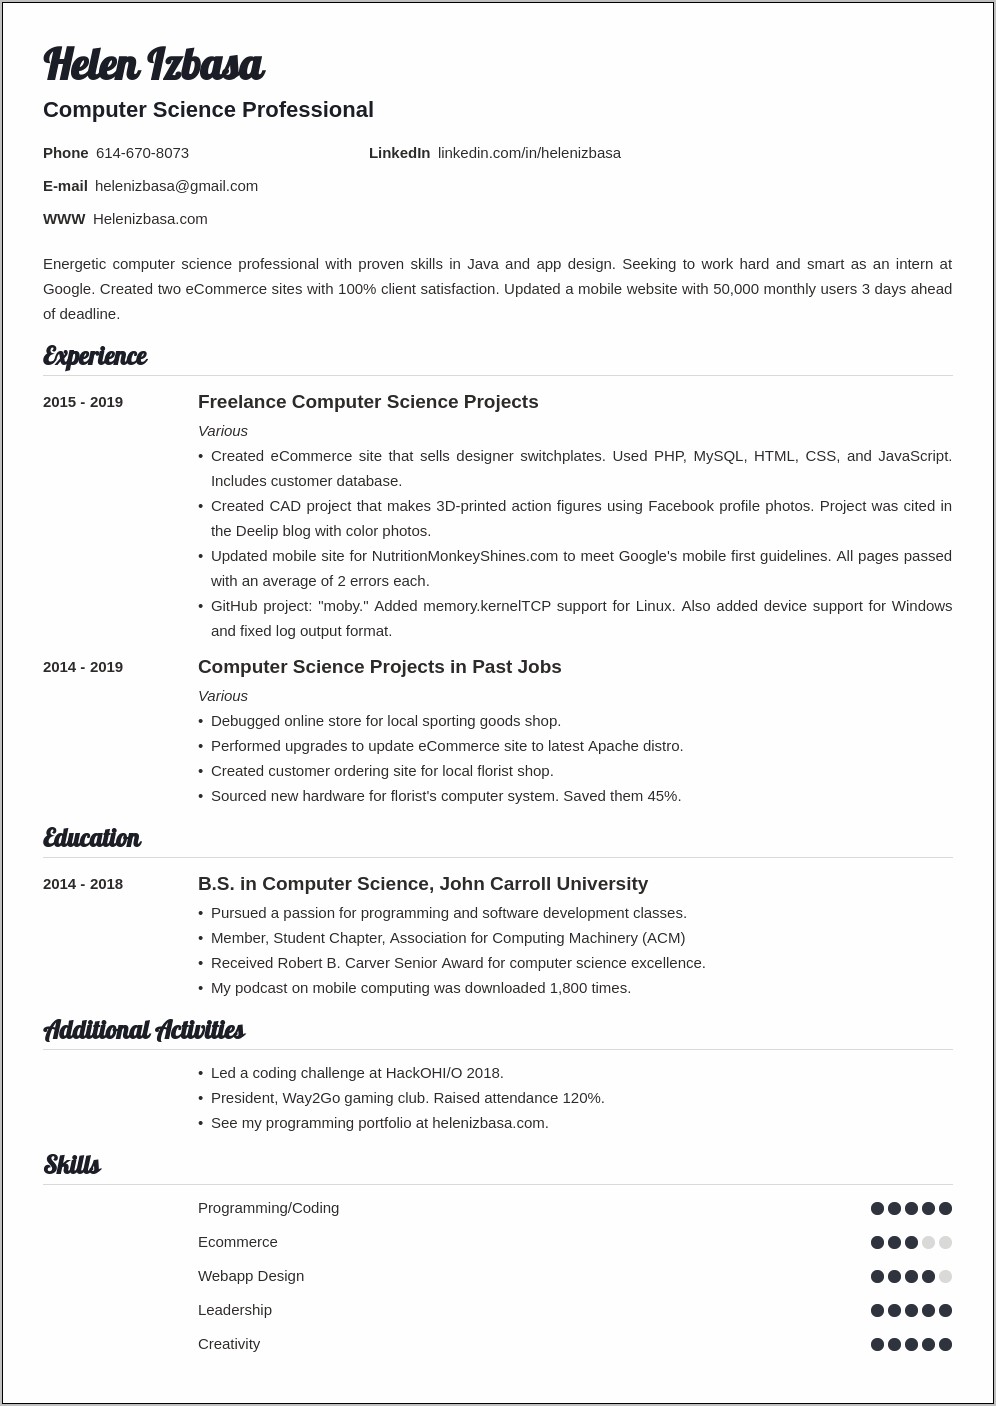 Resume Objective For A Student Internship